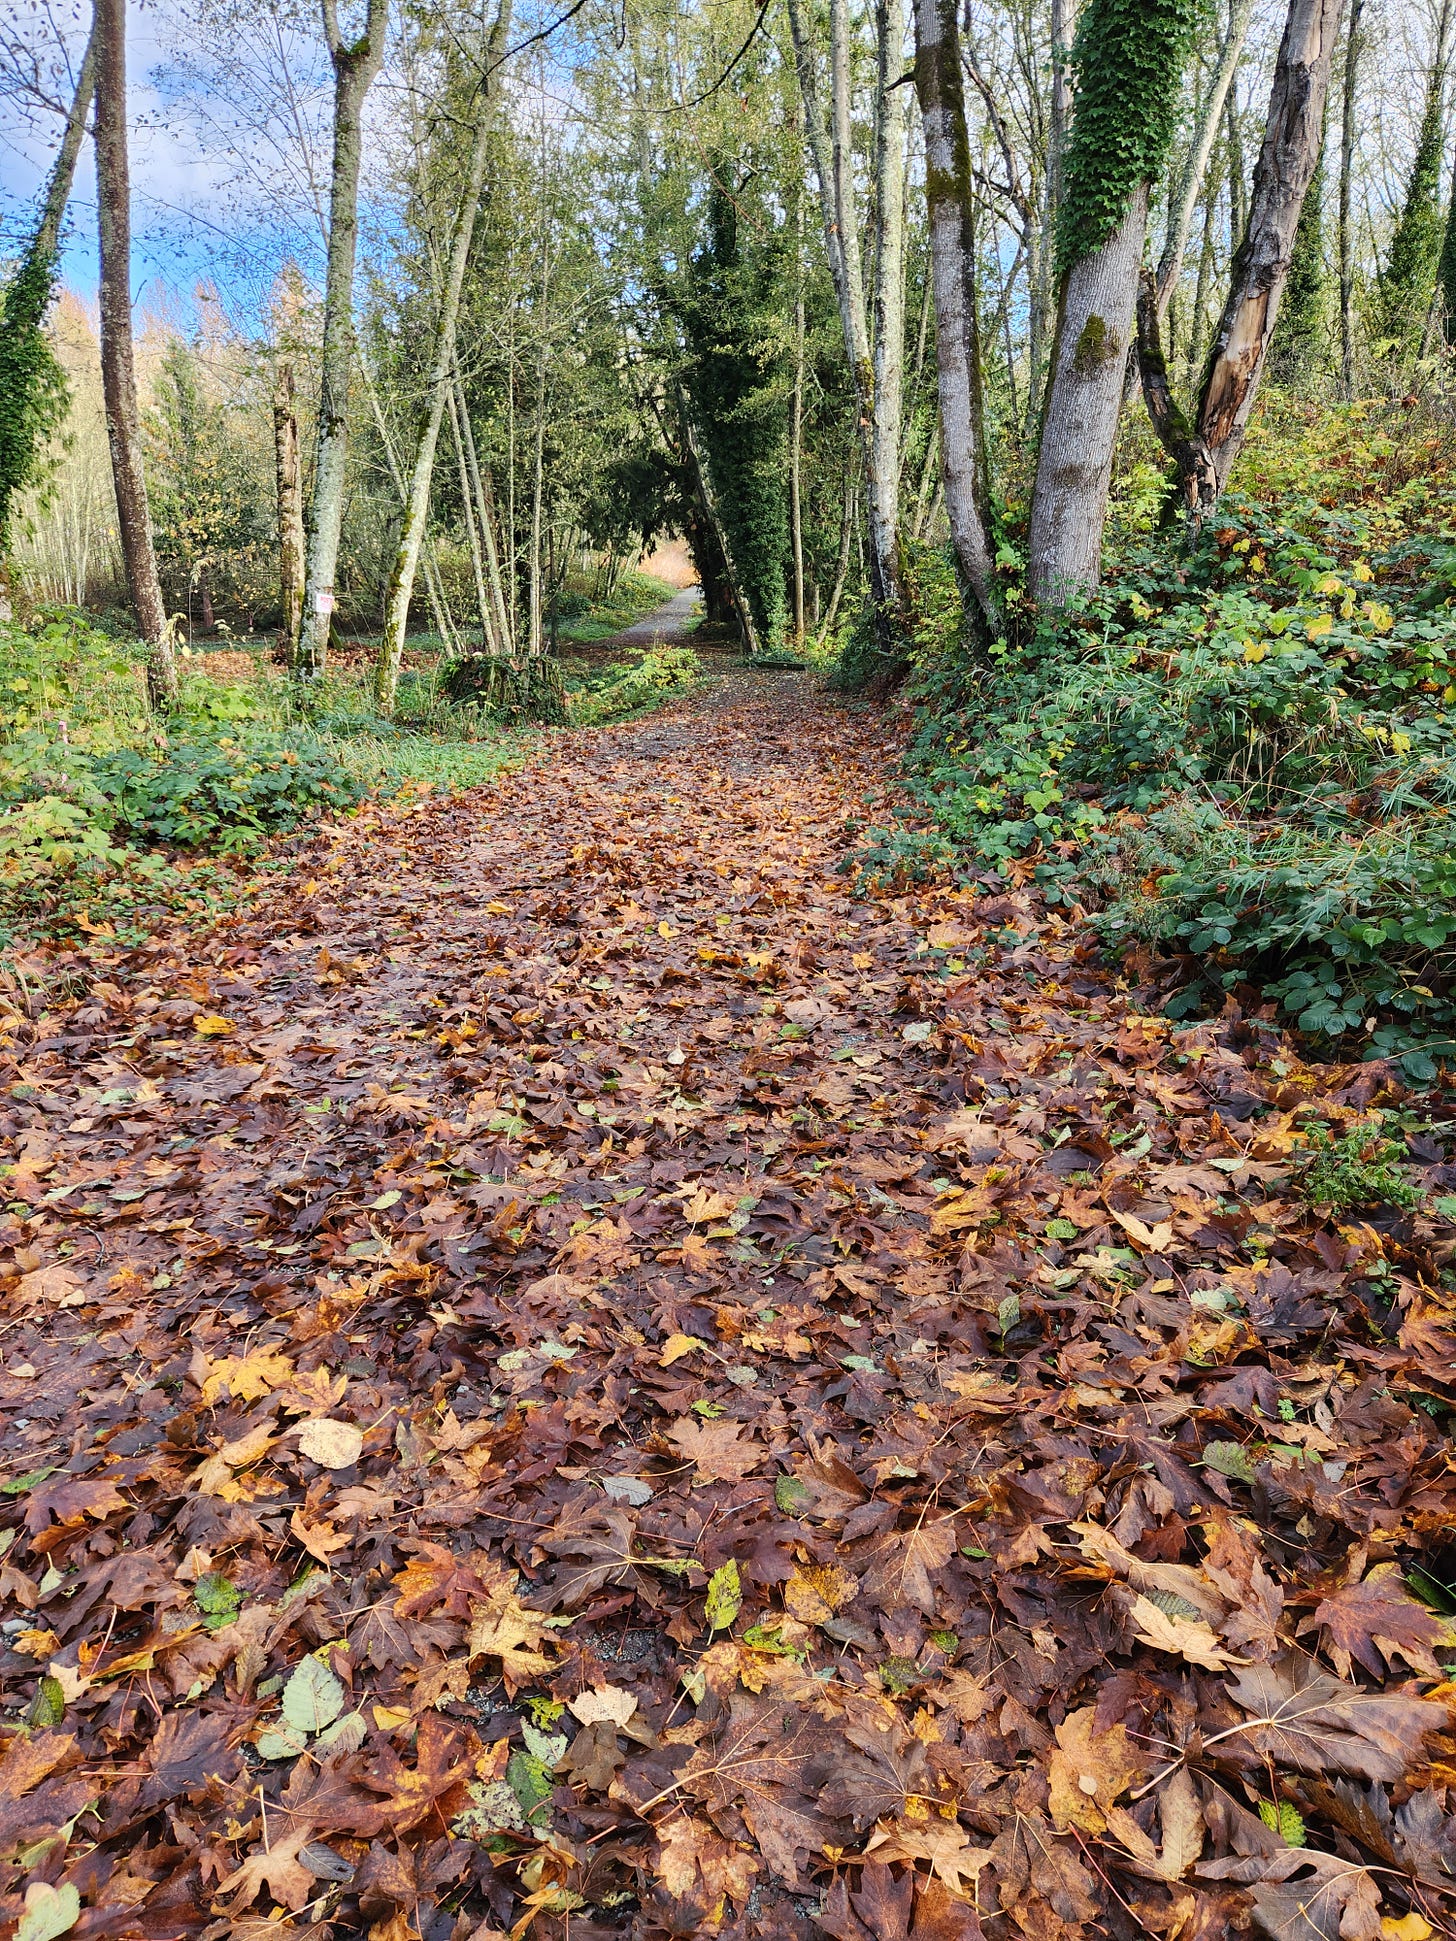 pathway through trees, covered in fallen leaves